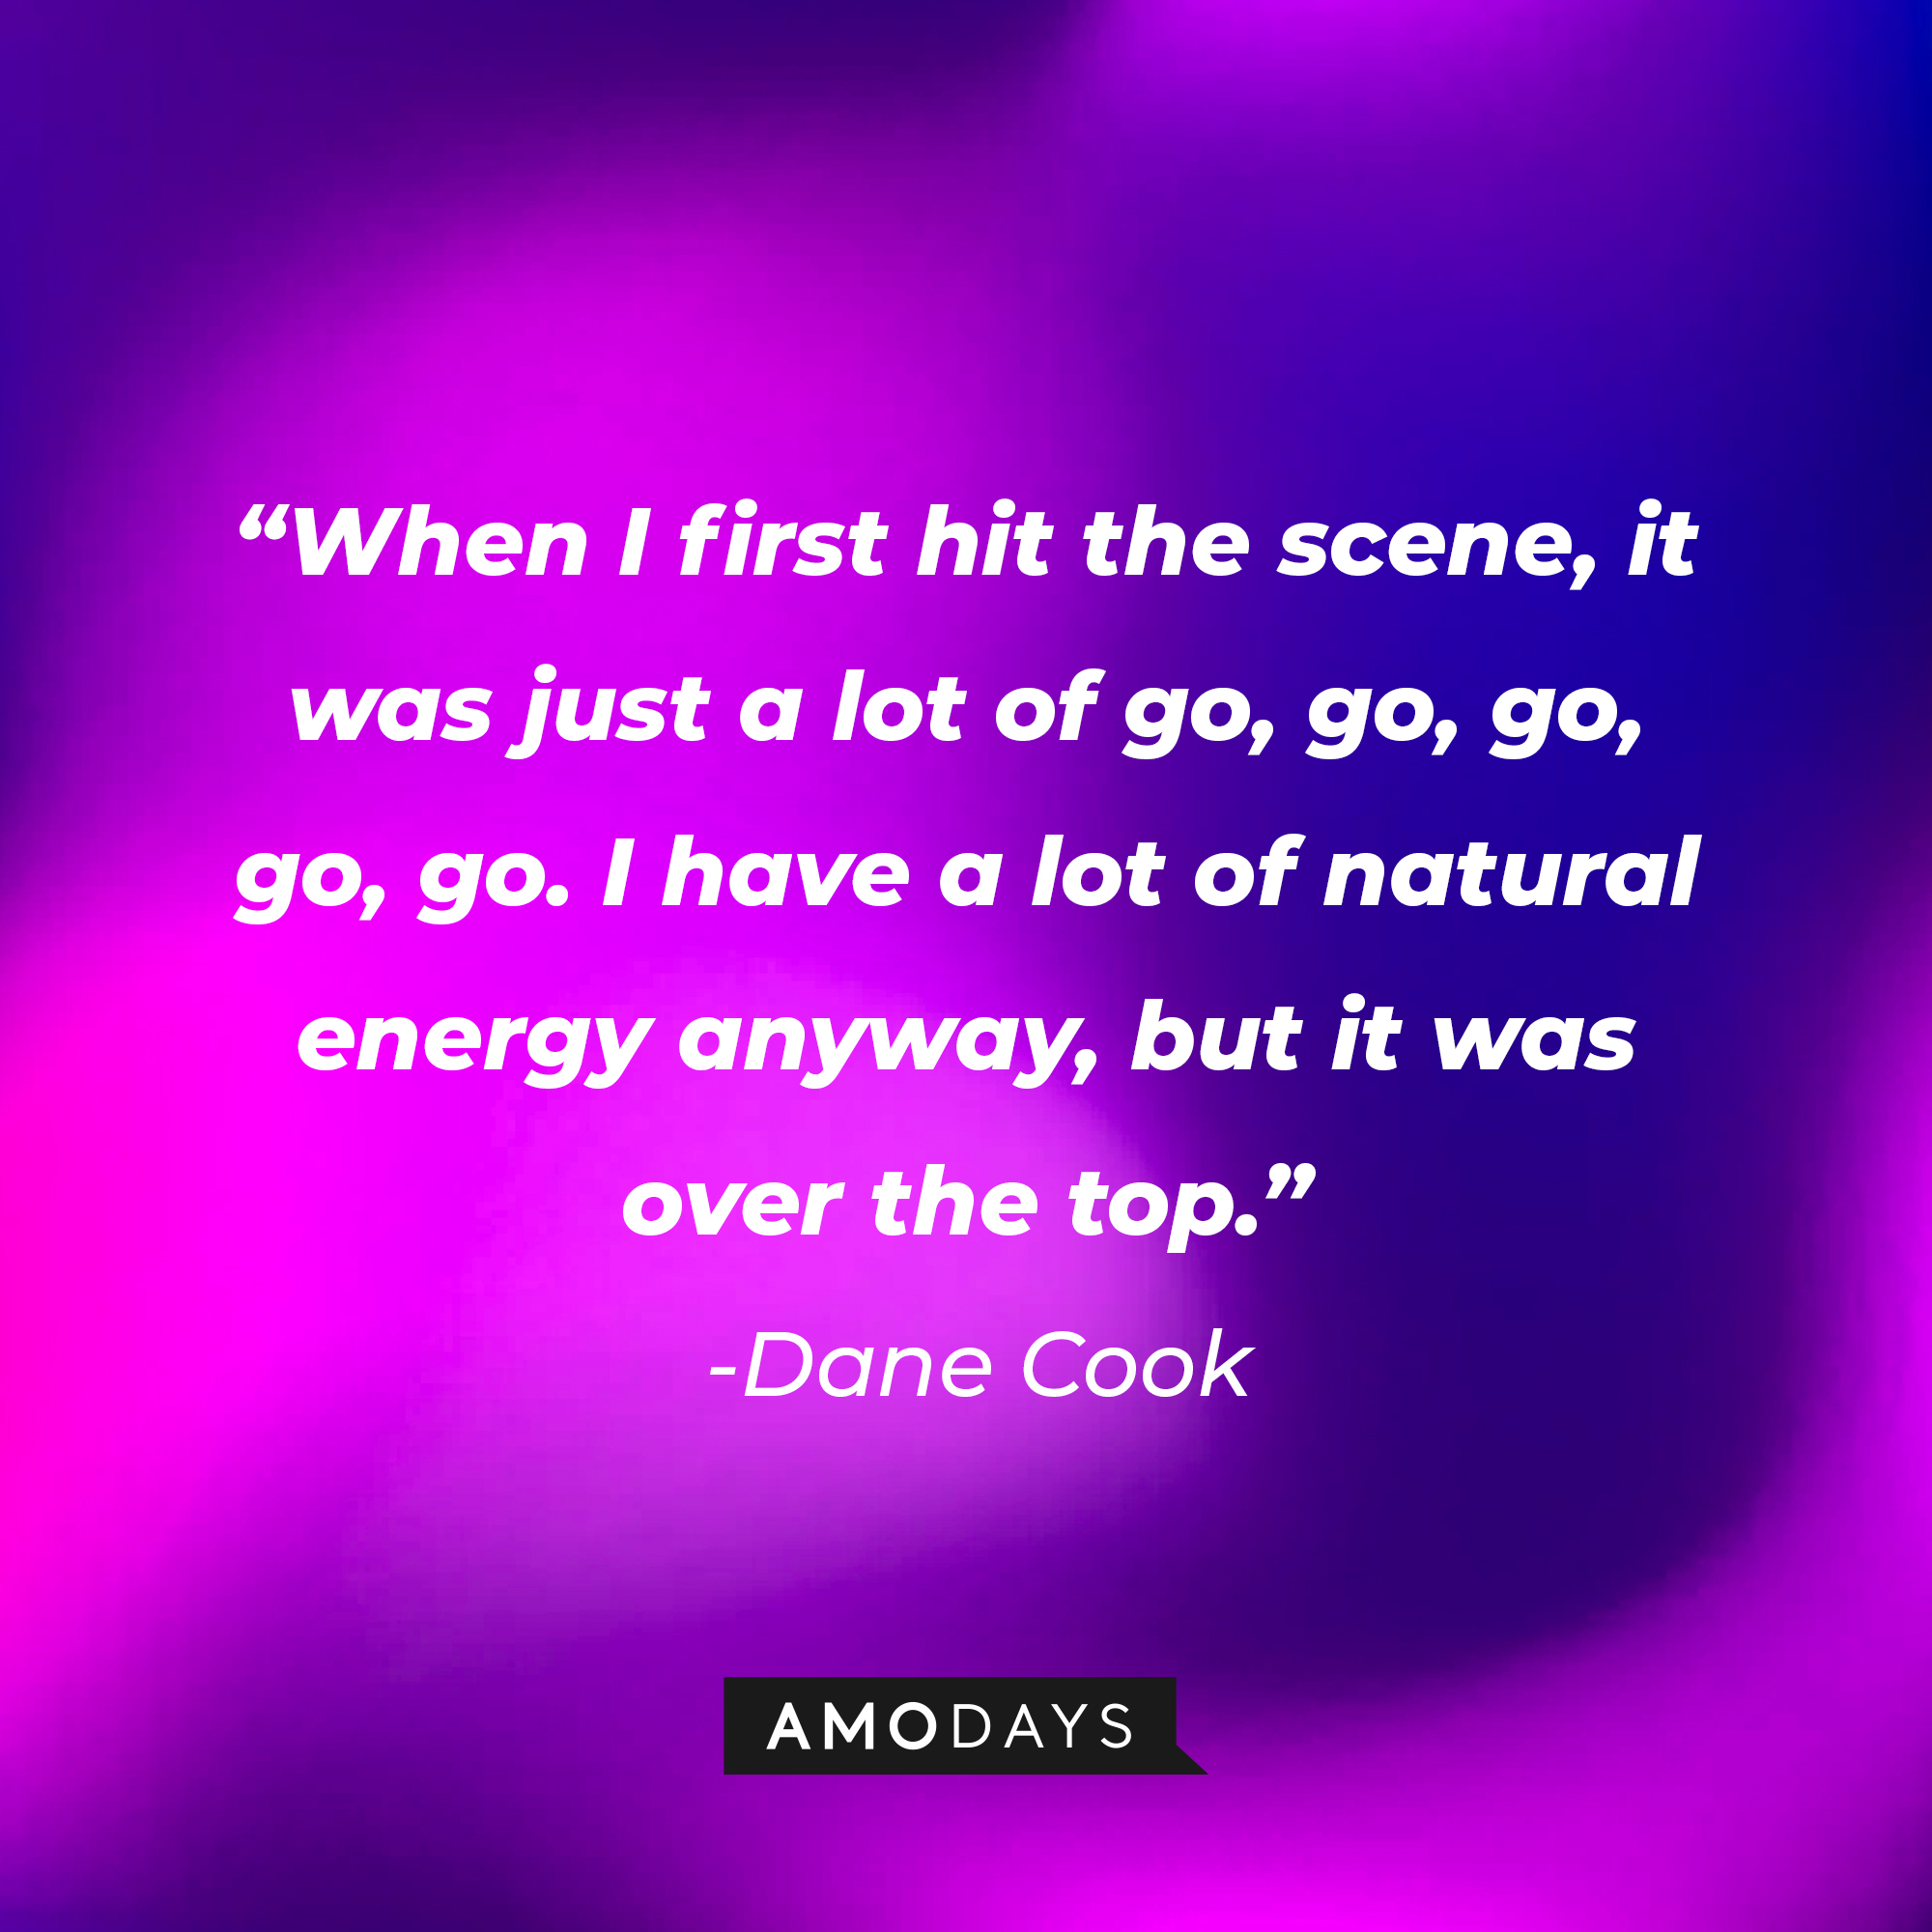 Dane Cook's quote: “When I first hit the scene, it was just a lot of go, go, go, go, go. I have a lot of natural energy anyway, but it was over the top.” | Source: Amodays